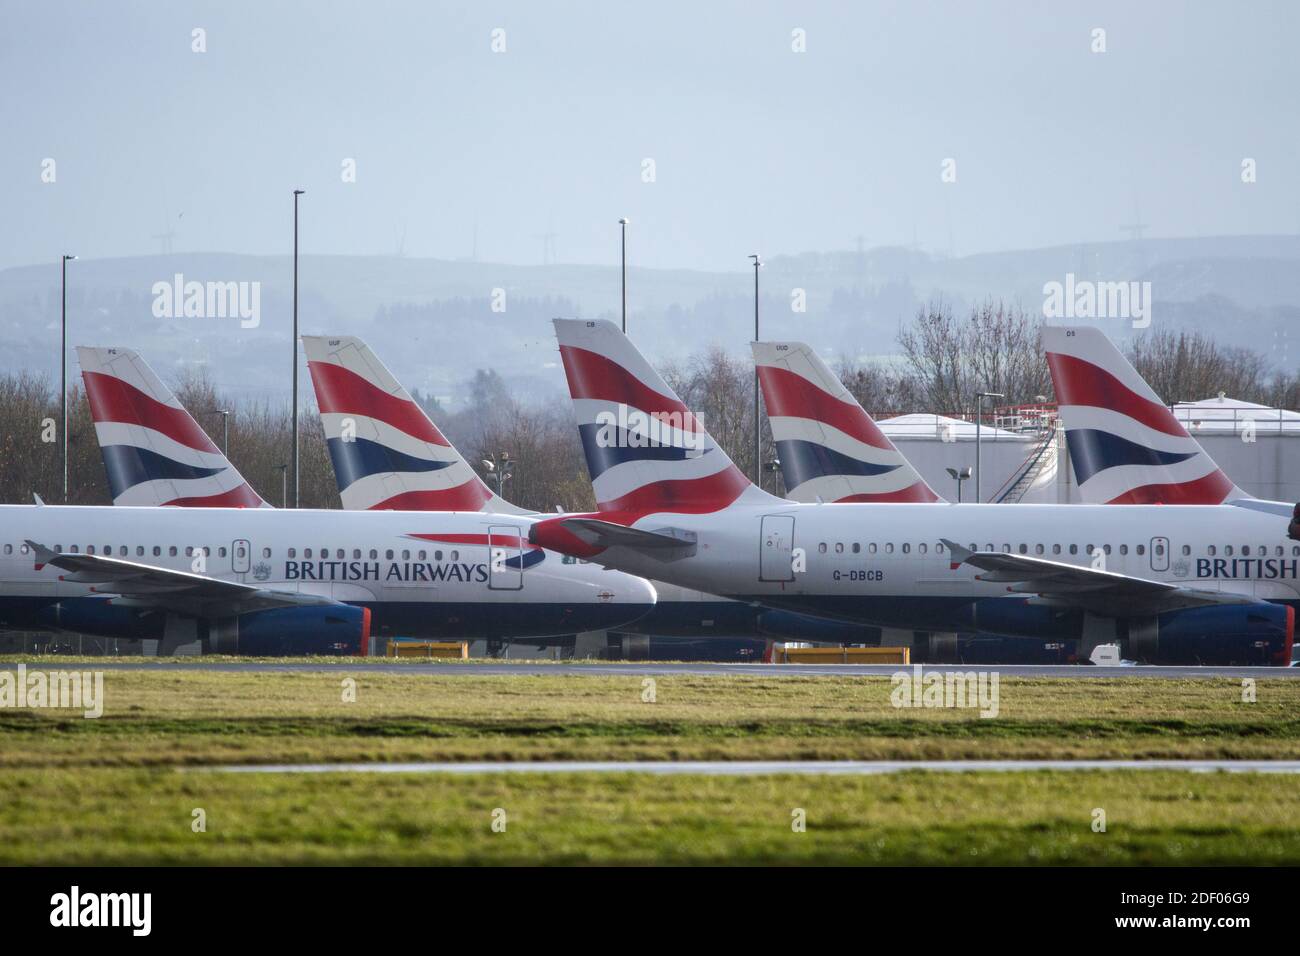 Glasgow, Scotland, UK. 2nd Dec, 2020. Pictured:British Airways airbus jets still stand grounded due to the coronavirus (COVID19) pandemic. Due to the uncertainty and a massive and unprecedented downturn in the global airline industry, British Airways (BA) have laid over a quarter of their staff. Glasgow Airport have now parked the grounded jets over to a smaller area of the tarmac as they used to occupy part of the airports second runway. Credit: Colin Fisher/Alamy Live News Stock Photo